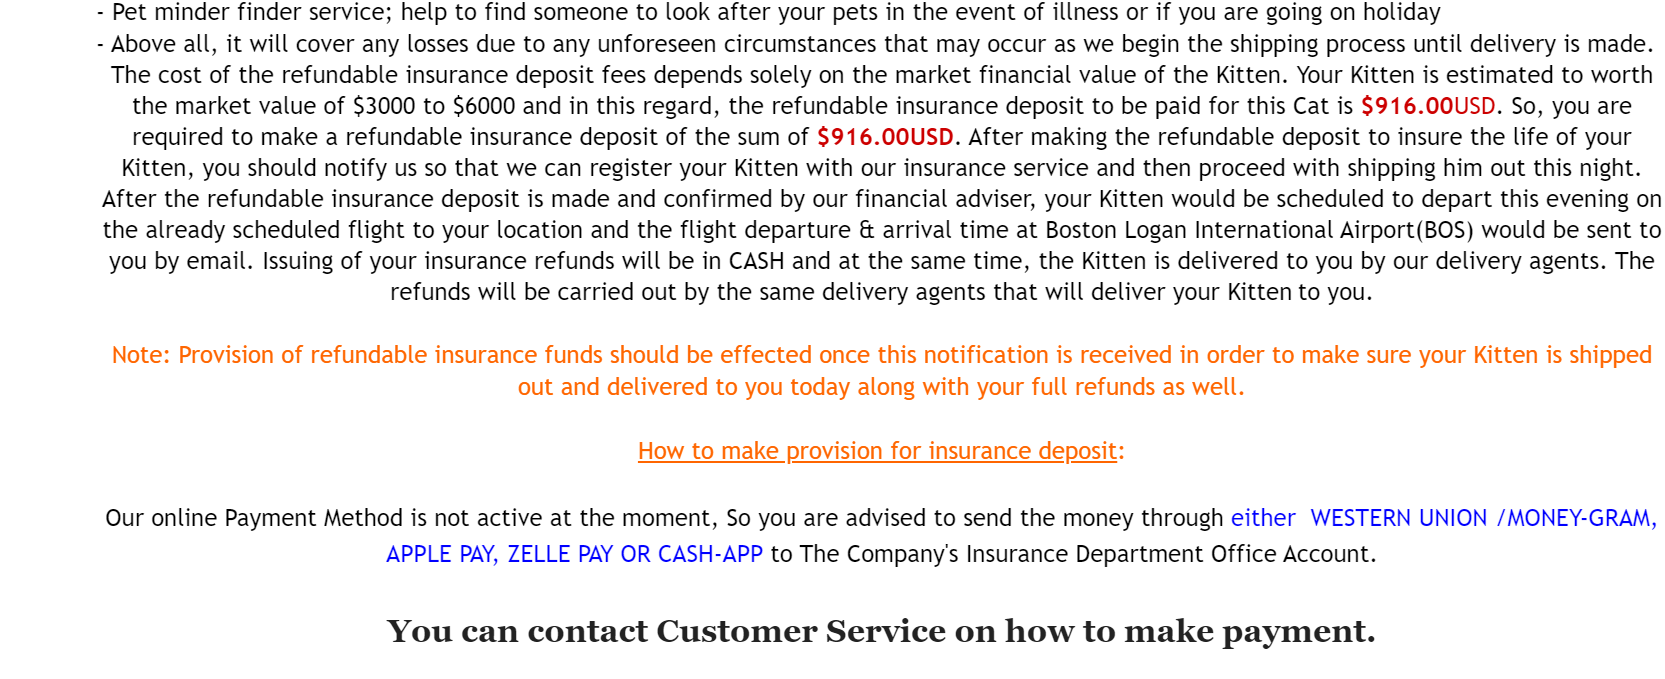 Requesting for "Refundable Insurance Payment" Scam